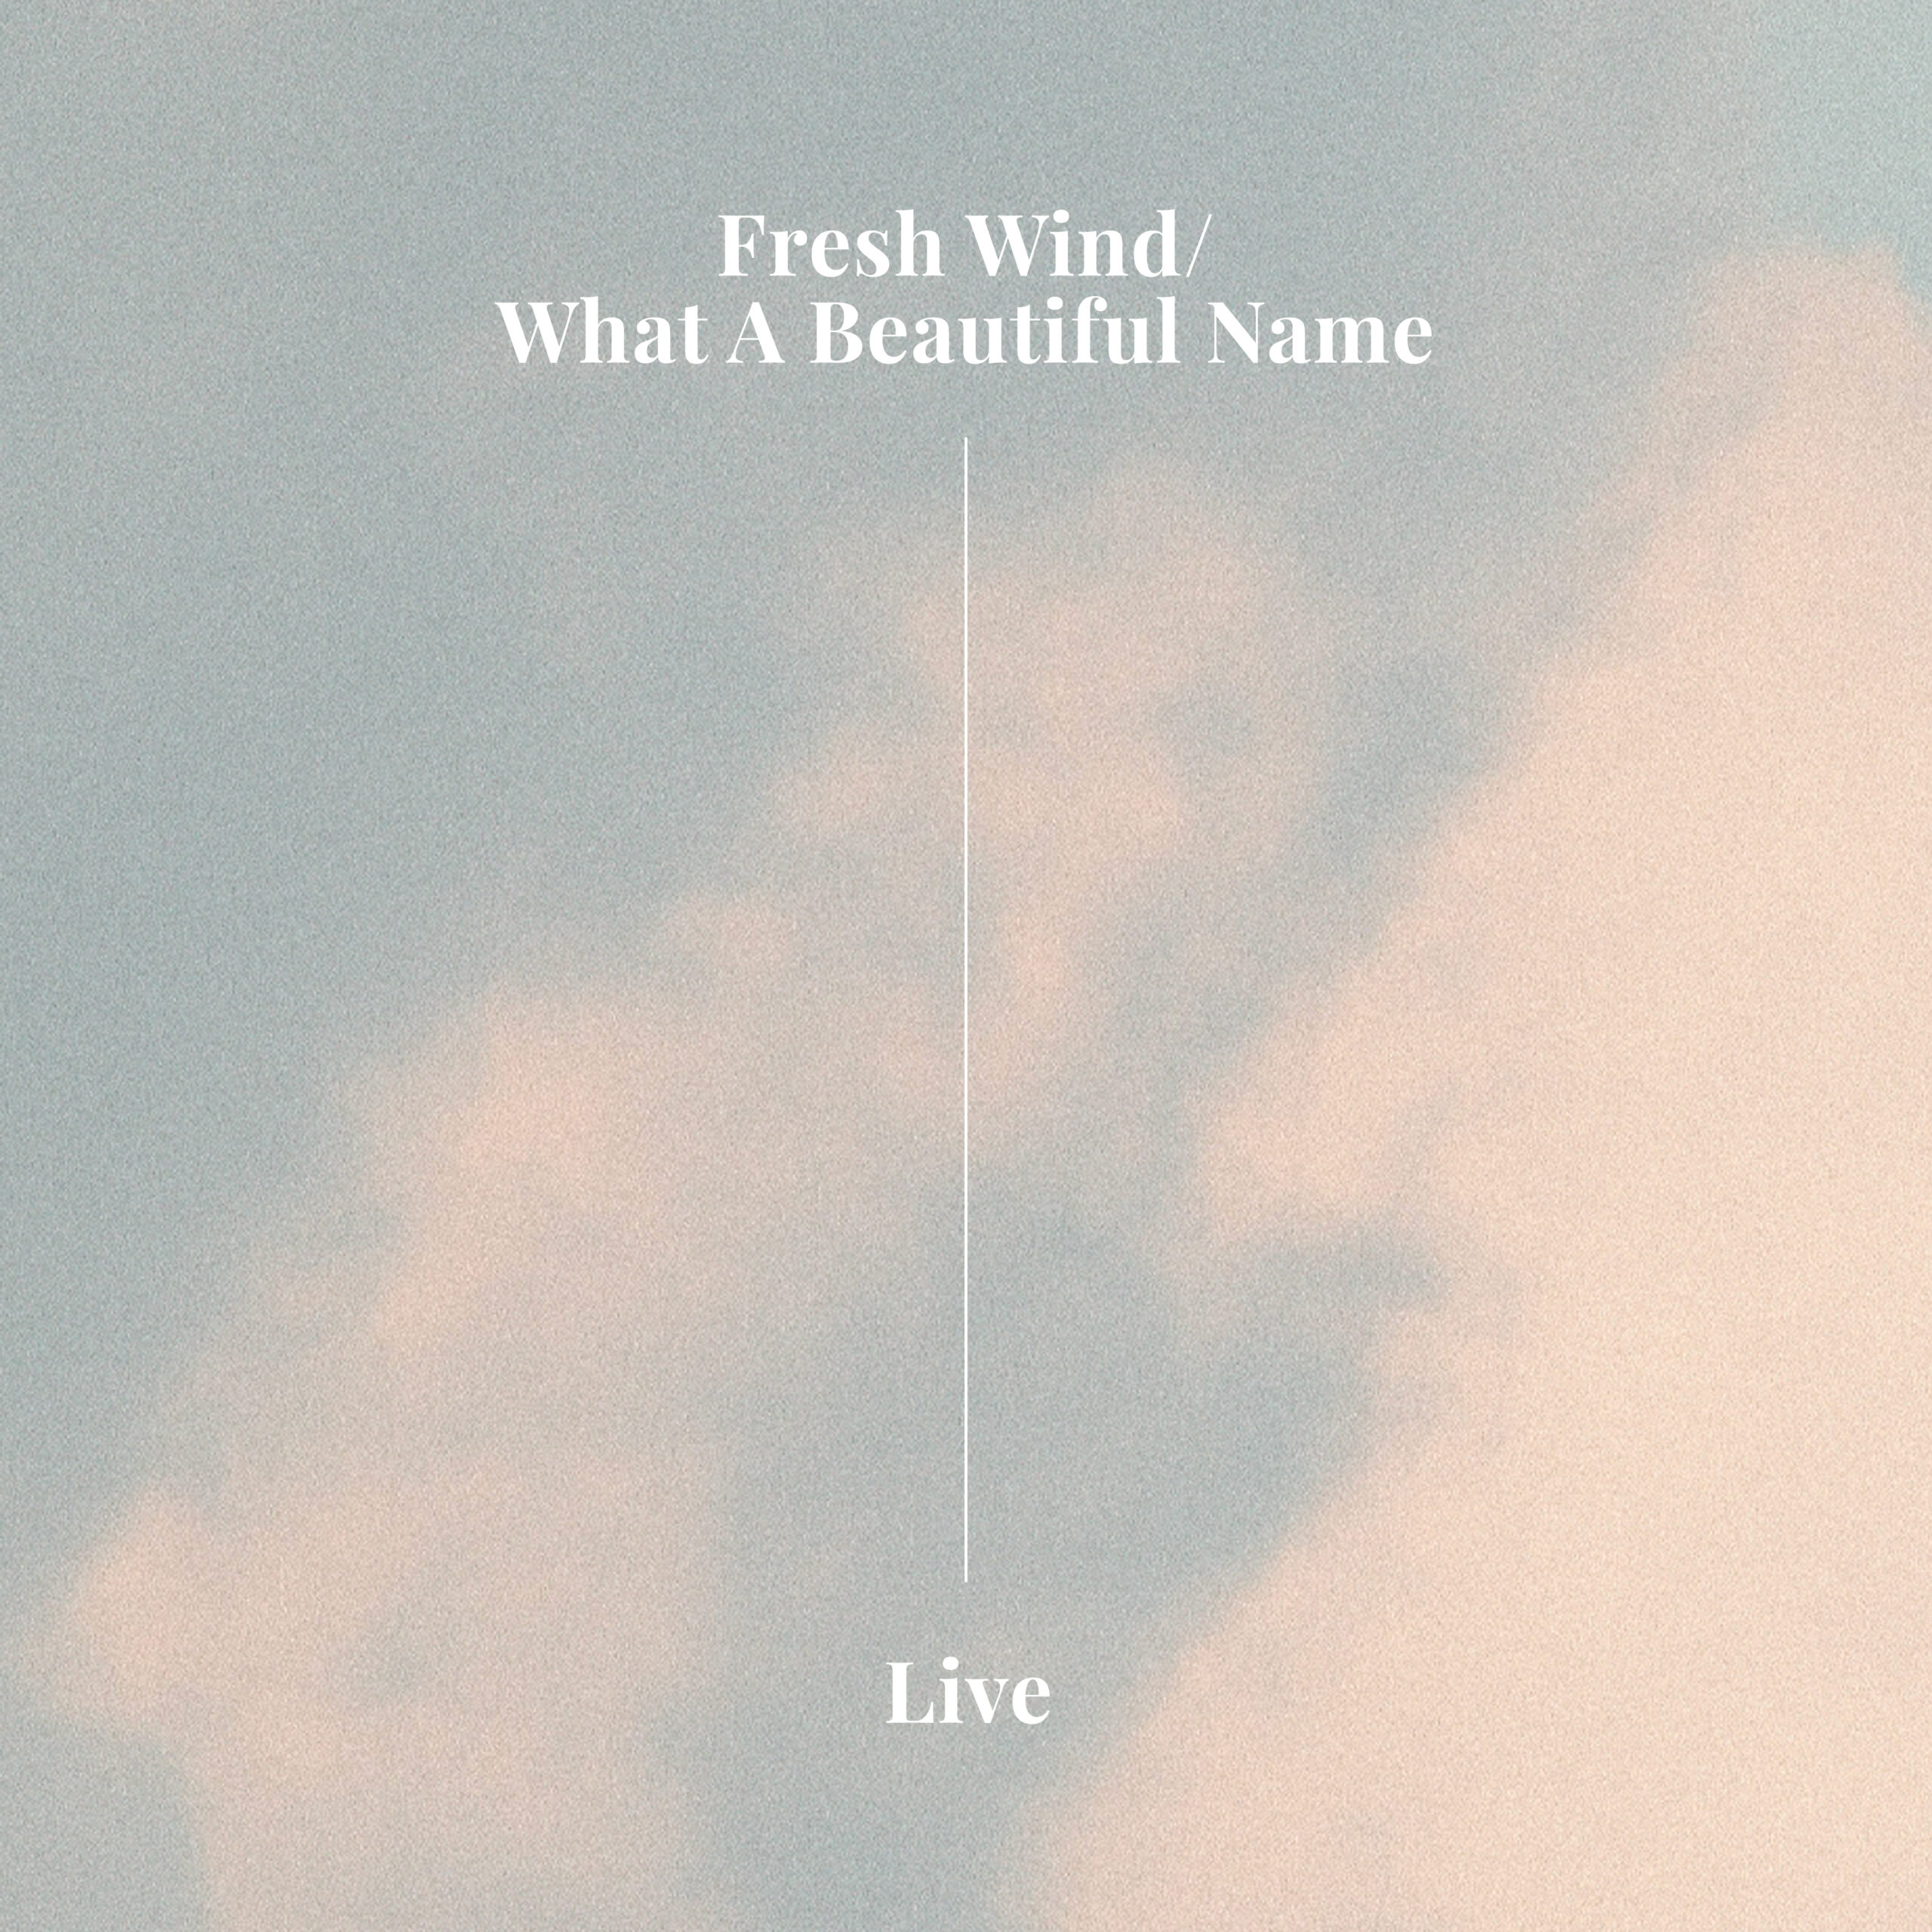 GRAMMY® AWARD-WINNING HILLSONG WORSHIP RELEASES LIVE MULTITRACK VERSION OF “FRESH WIND,” HIGHEST U.S. AUDIO STREAMING DEBUT OF ANY HILLSONG SINGLE TO DATE